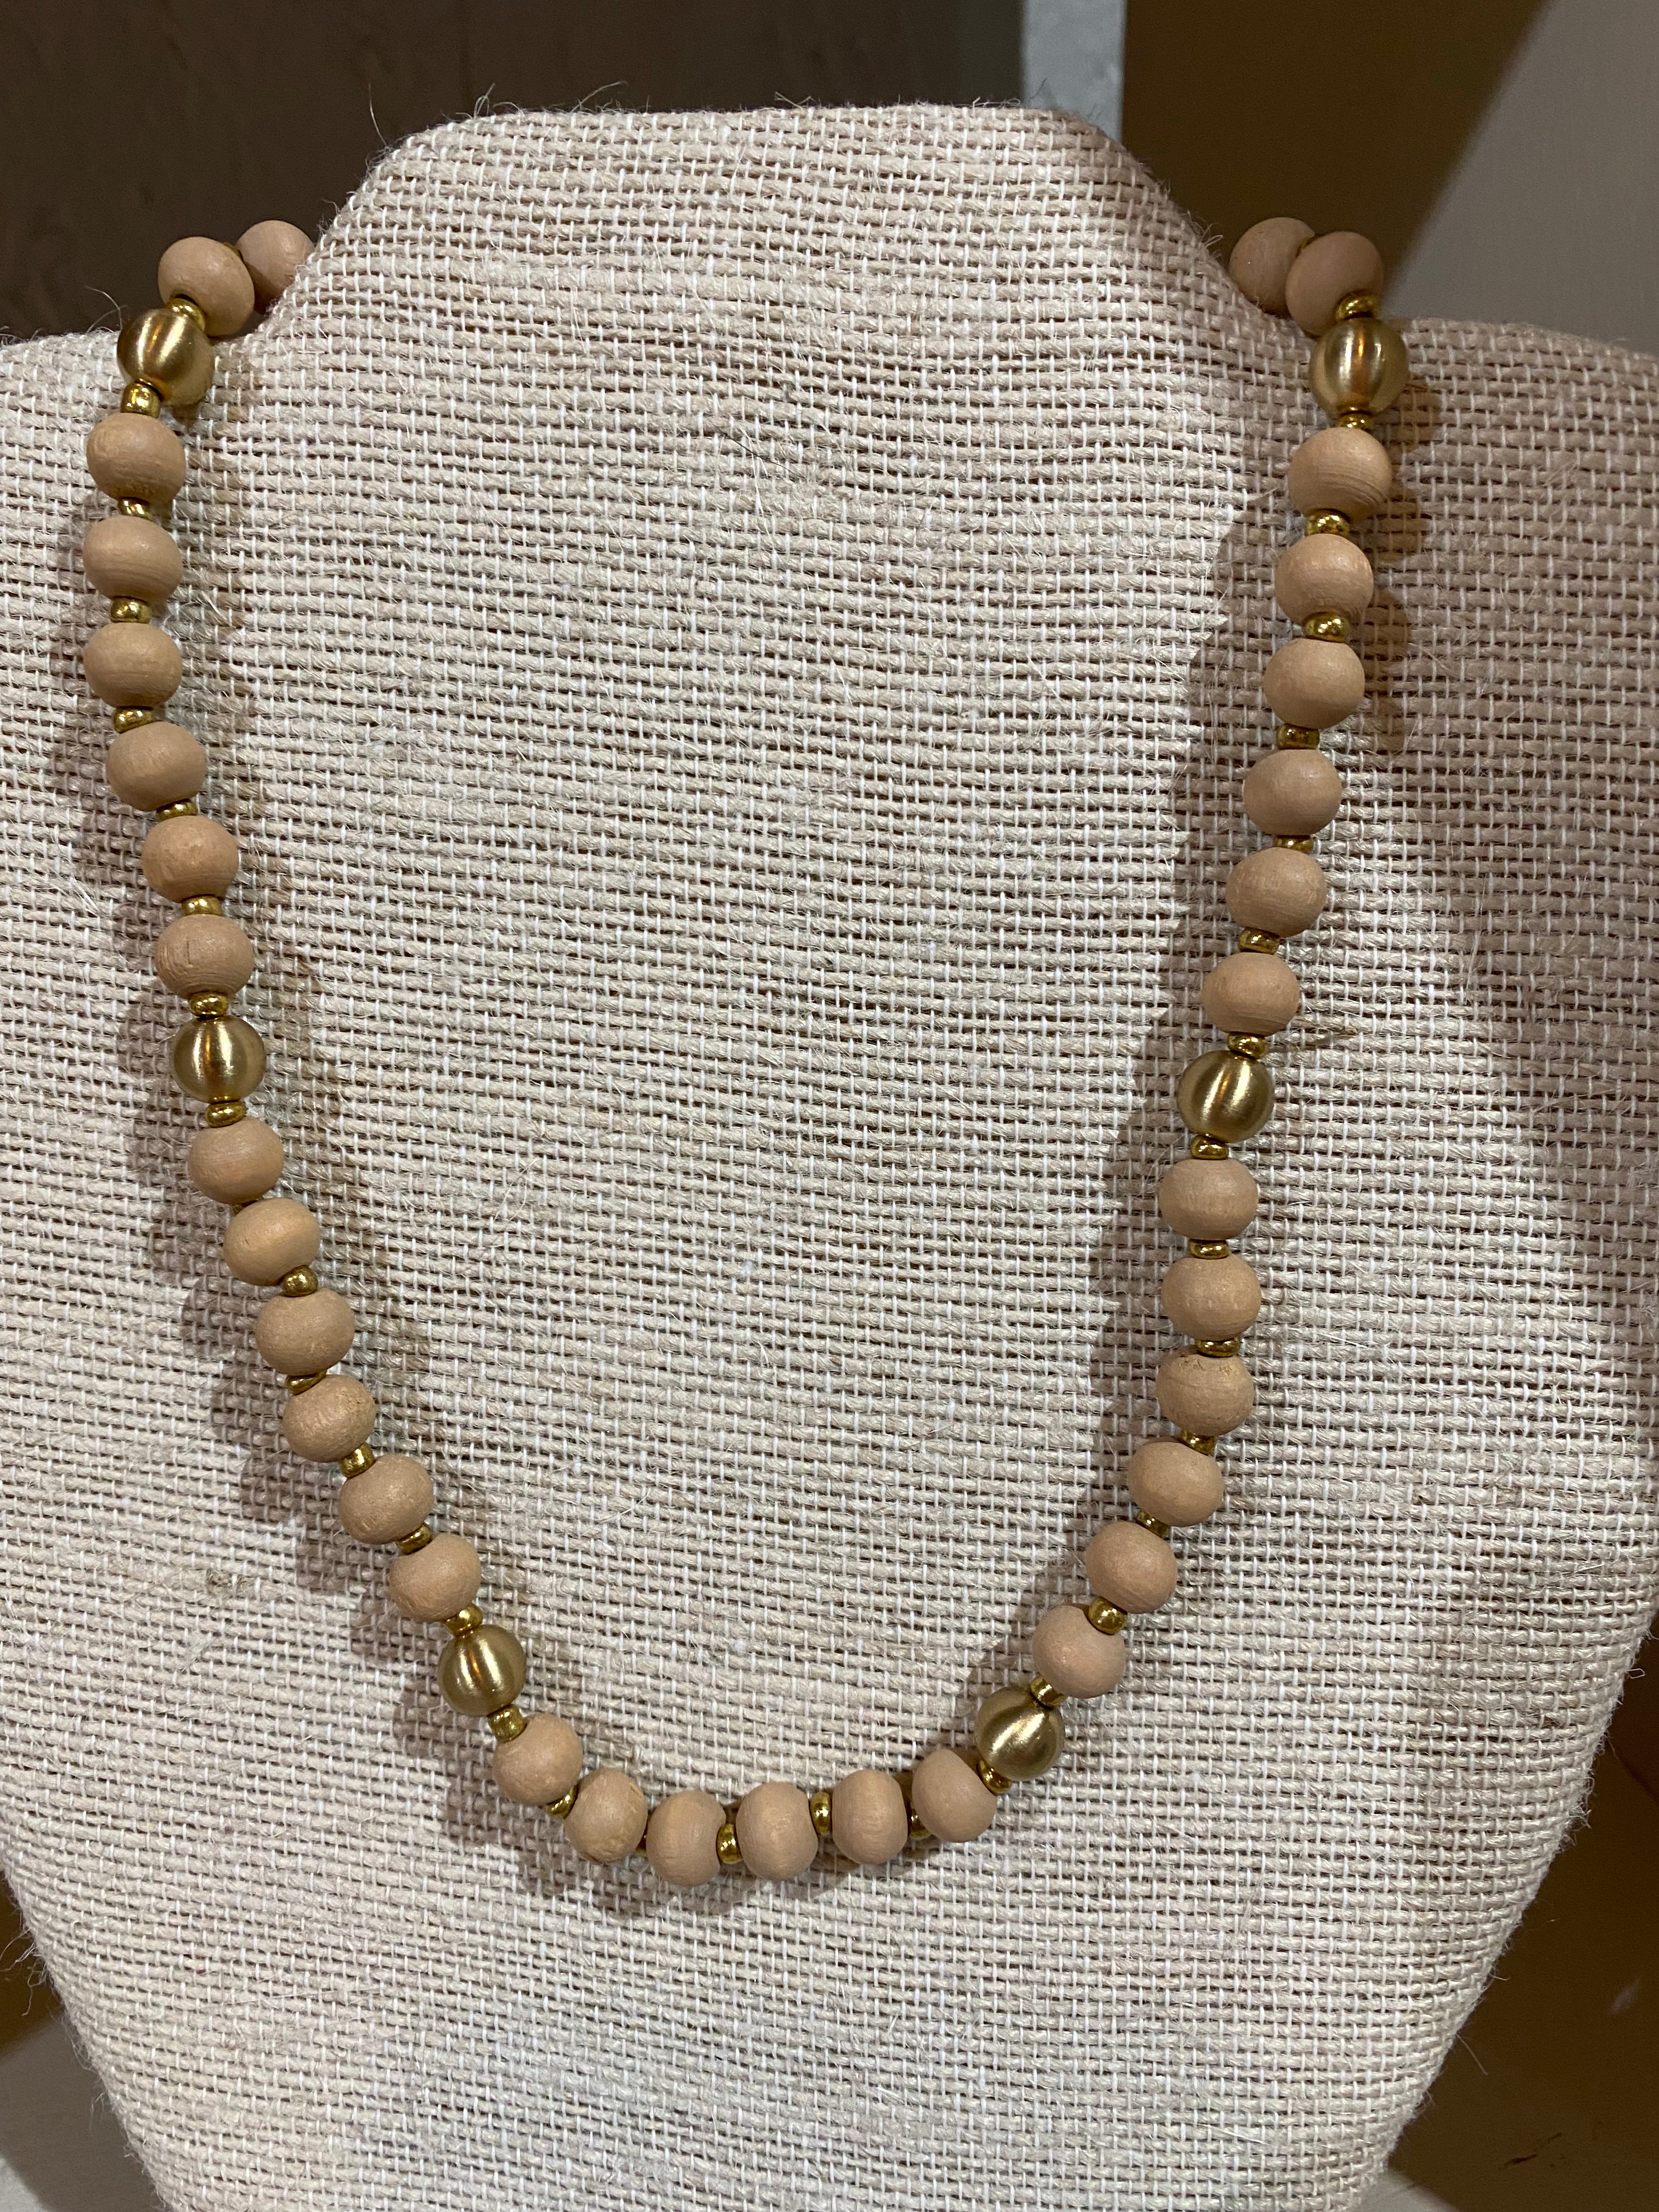 Wood bead necklace